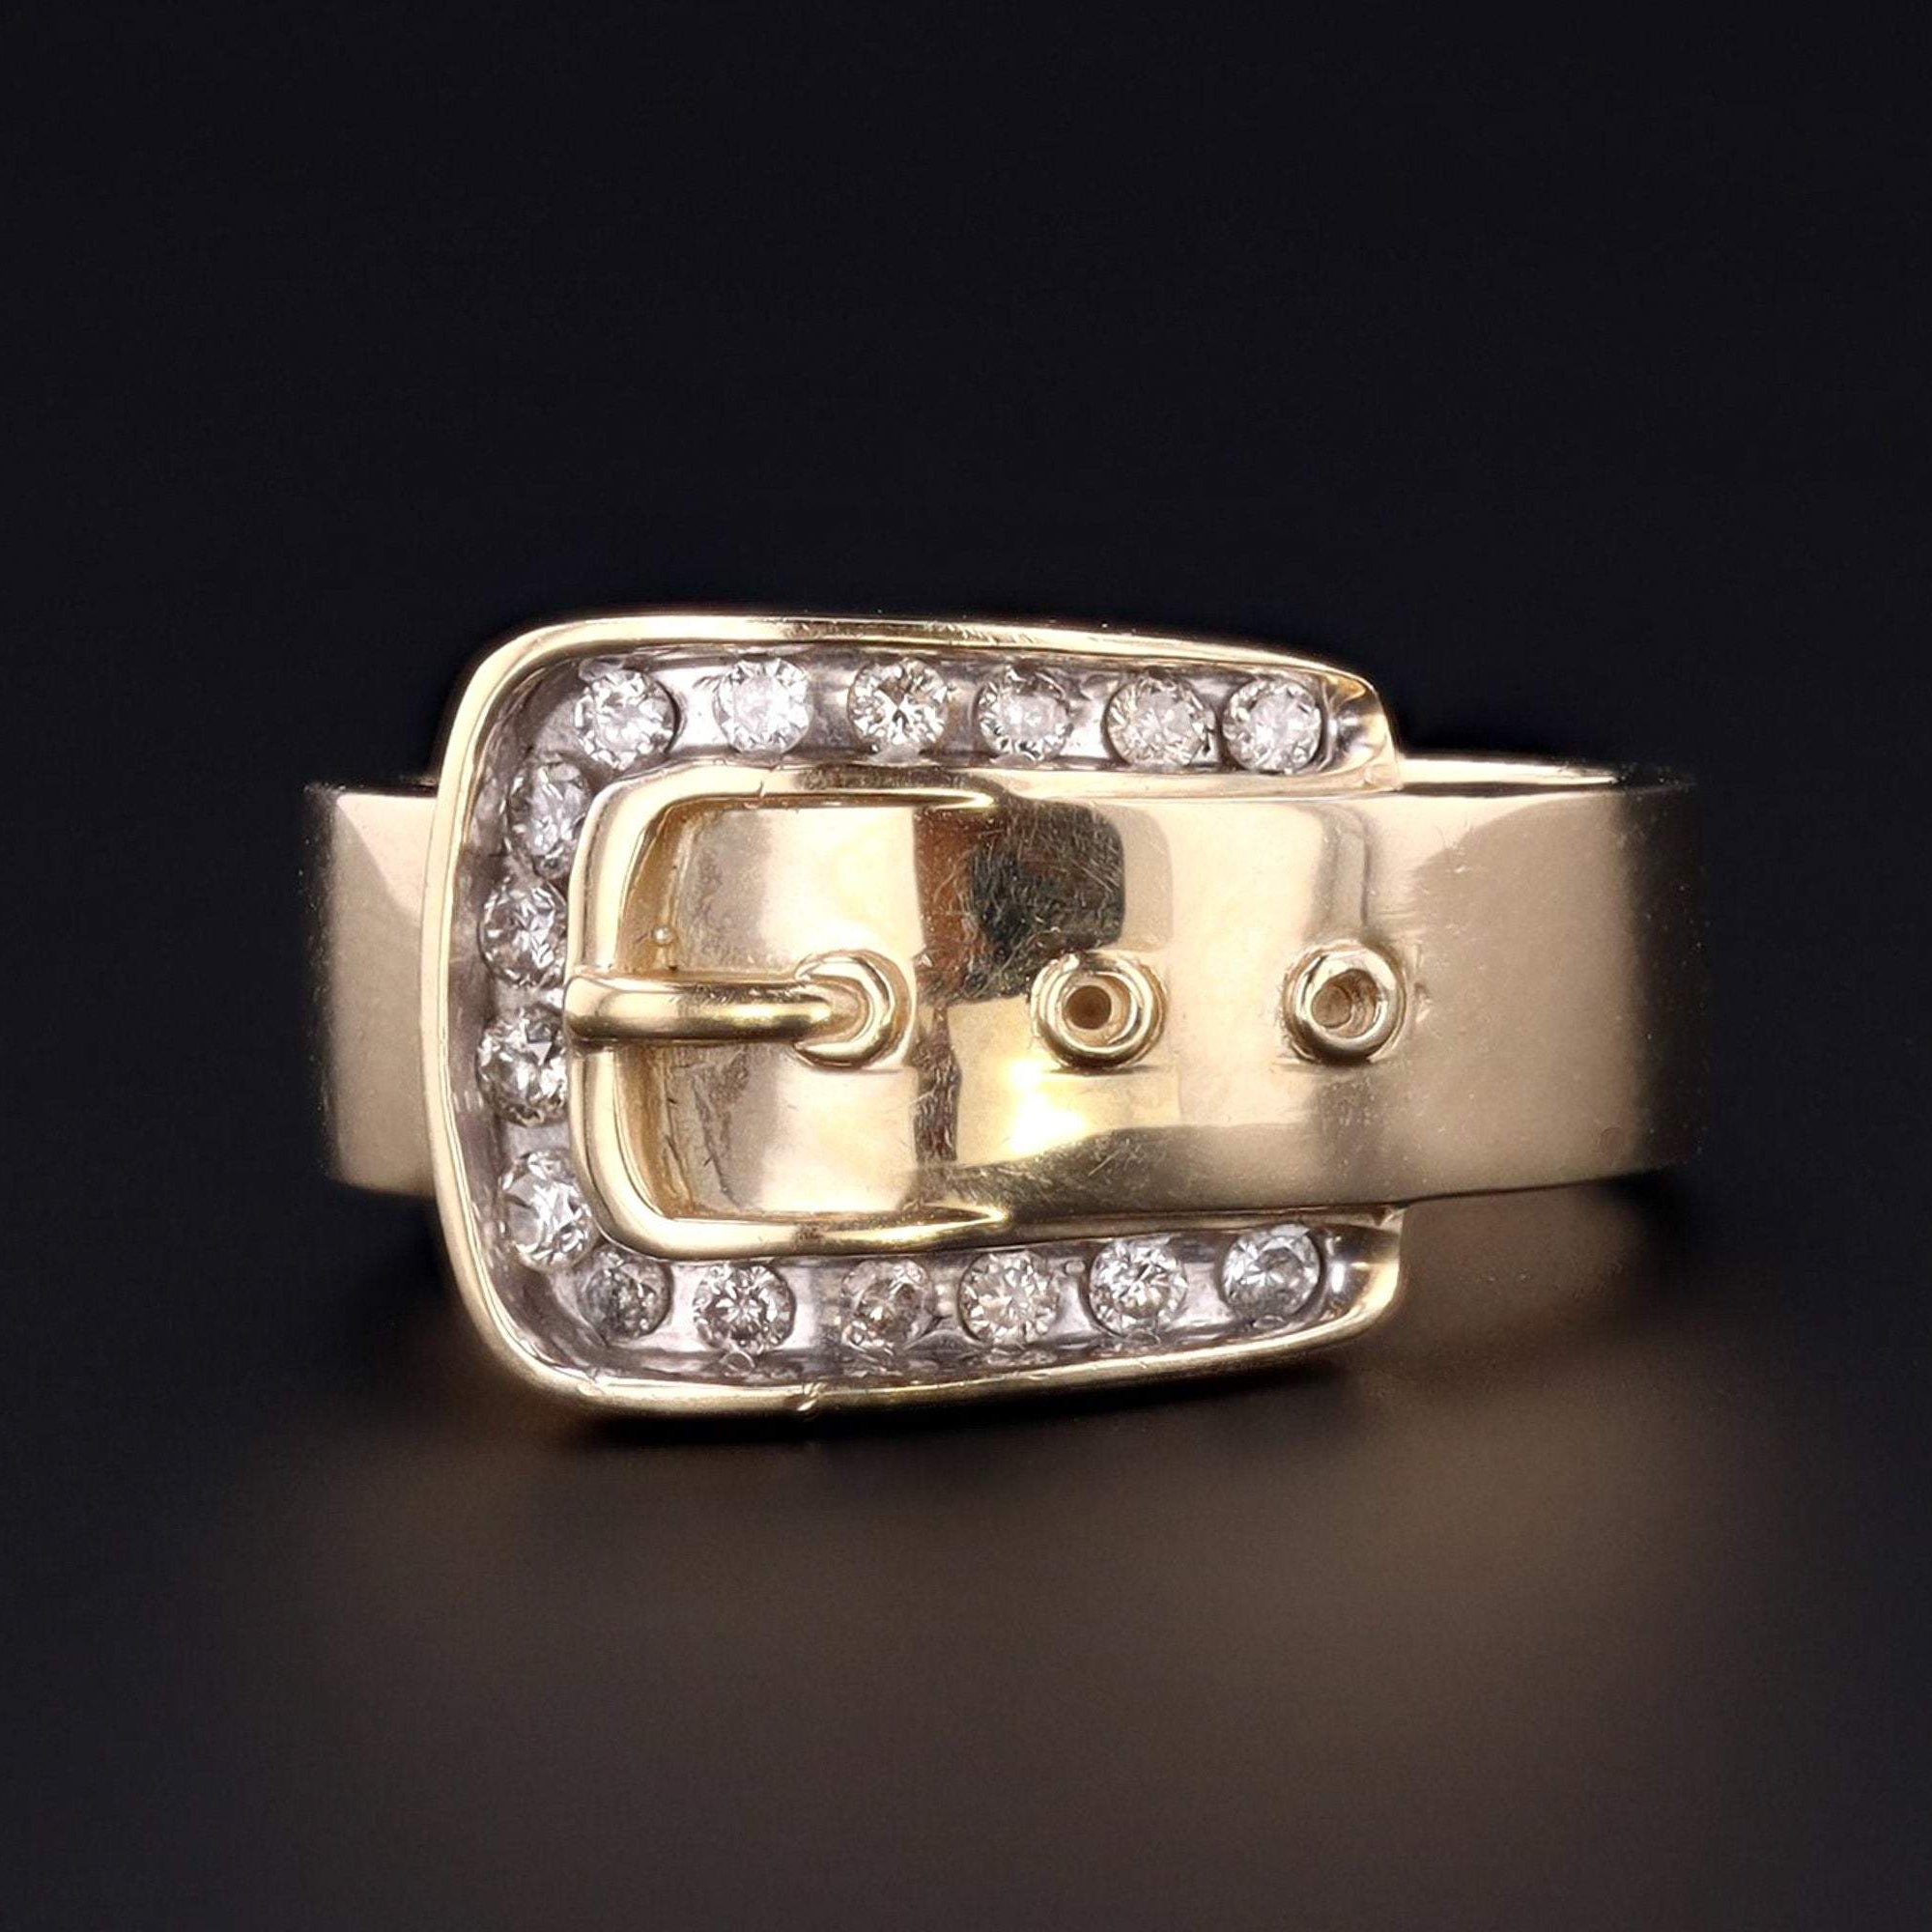 Vintage Buckle Ring | 10k Gold Buckle Ring | 10k Gold & Diamond Buckle Ring